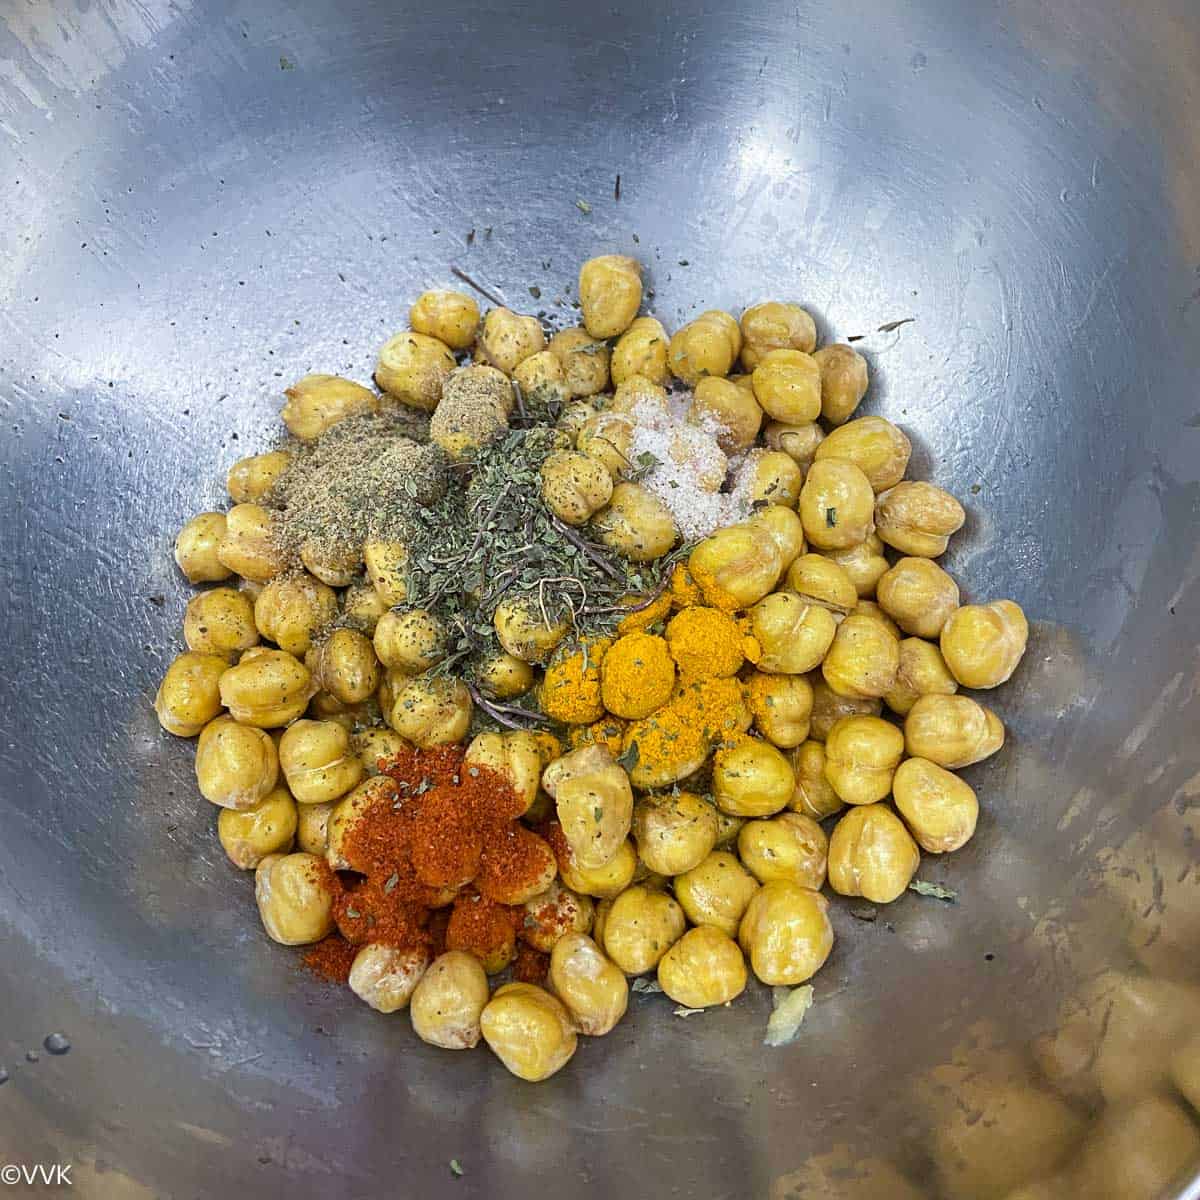 adding spices to partially roasted chickpeas